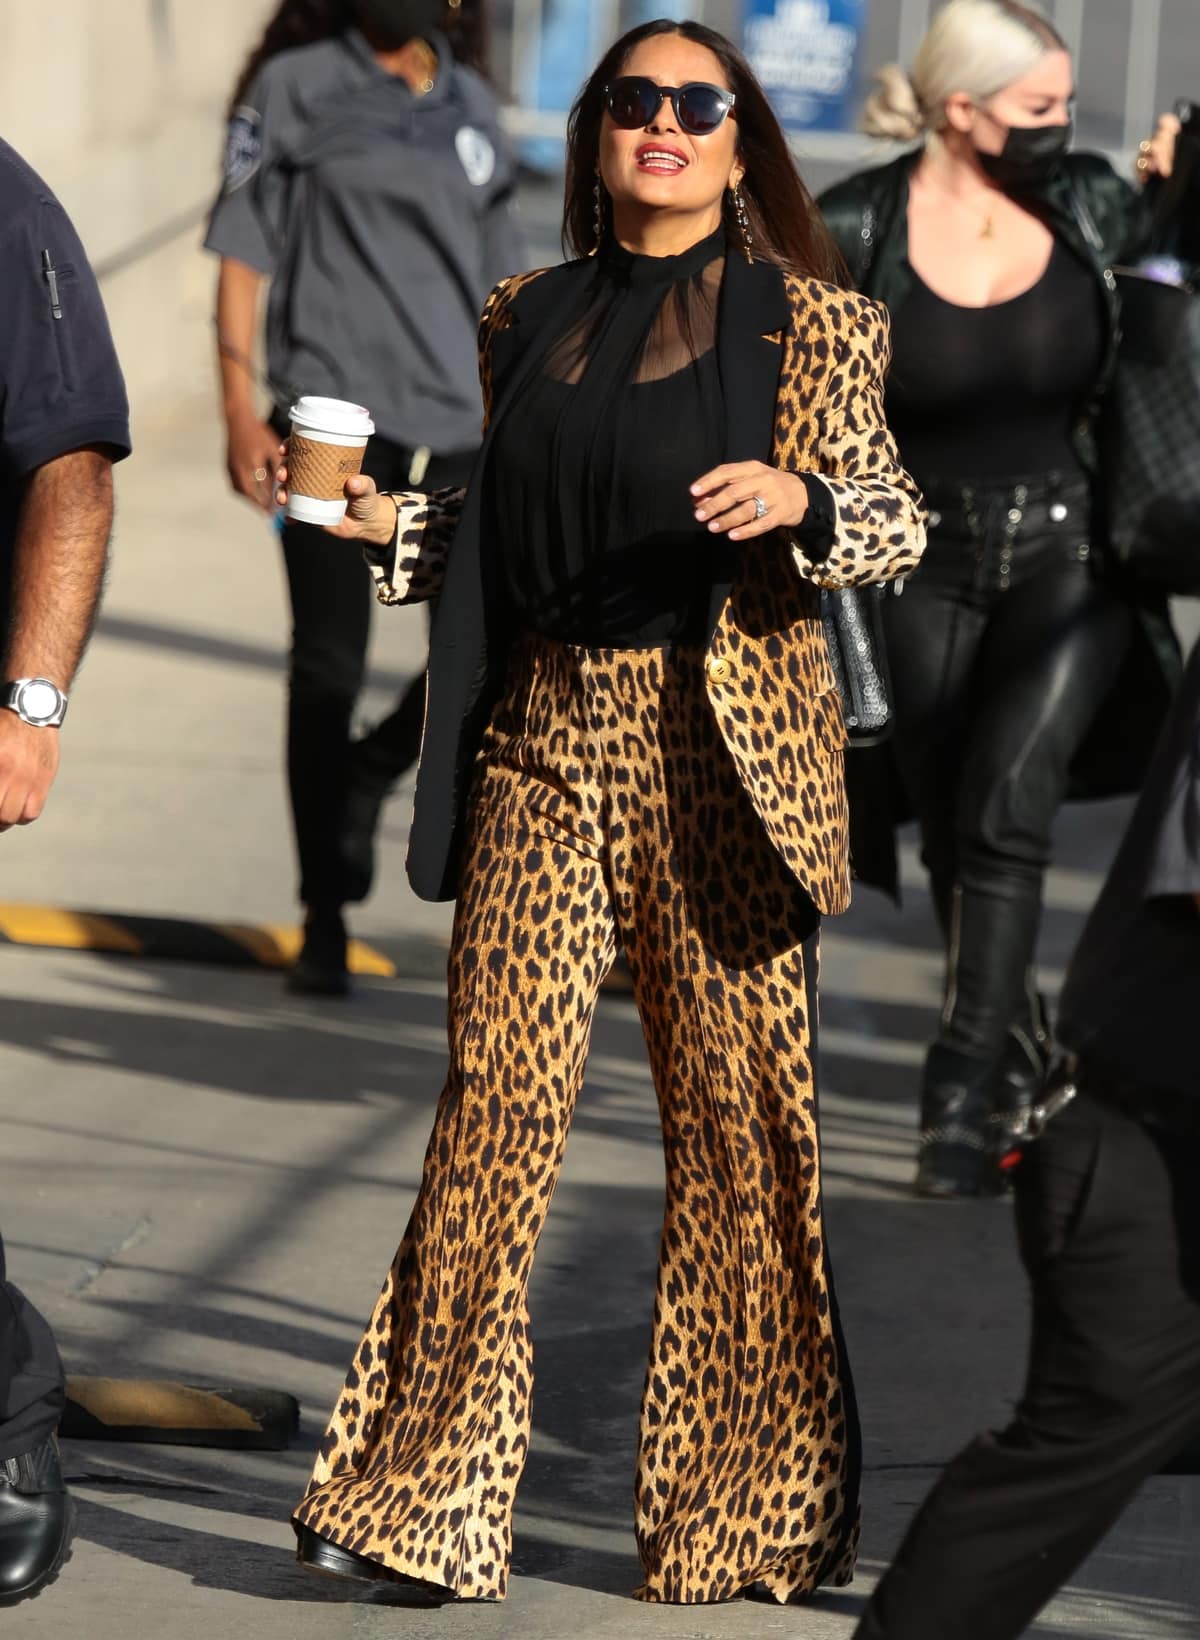 Salma Hayek arrived at the “Jimmy Kimmel Live!” set in Los Angeles on October 14, 2021, in a leopard print Elie Saab Pre-Fall 2021 suit